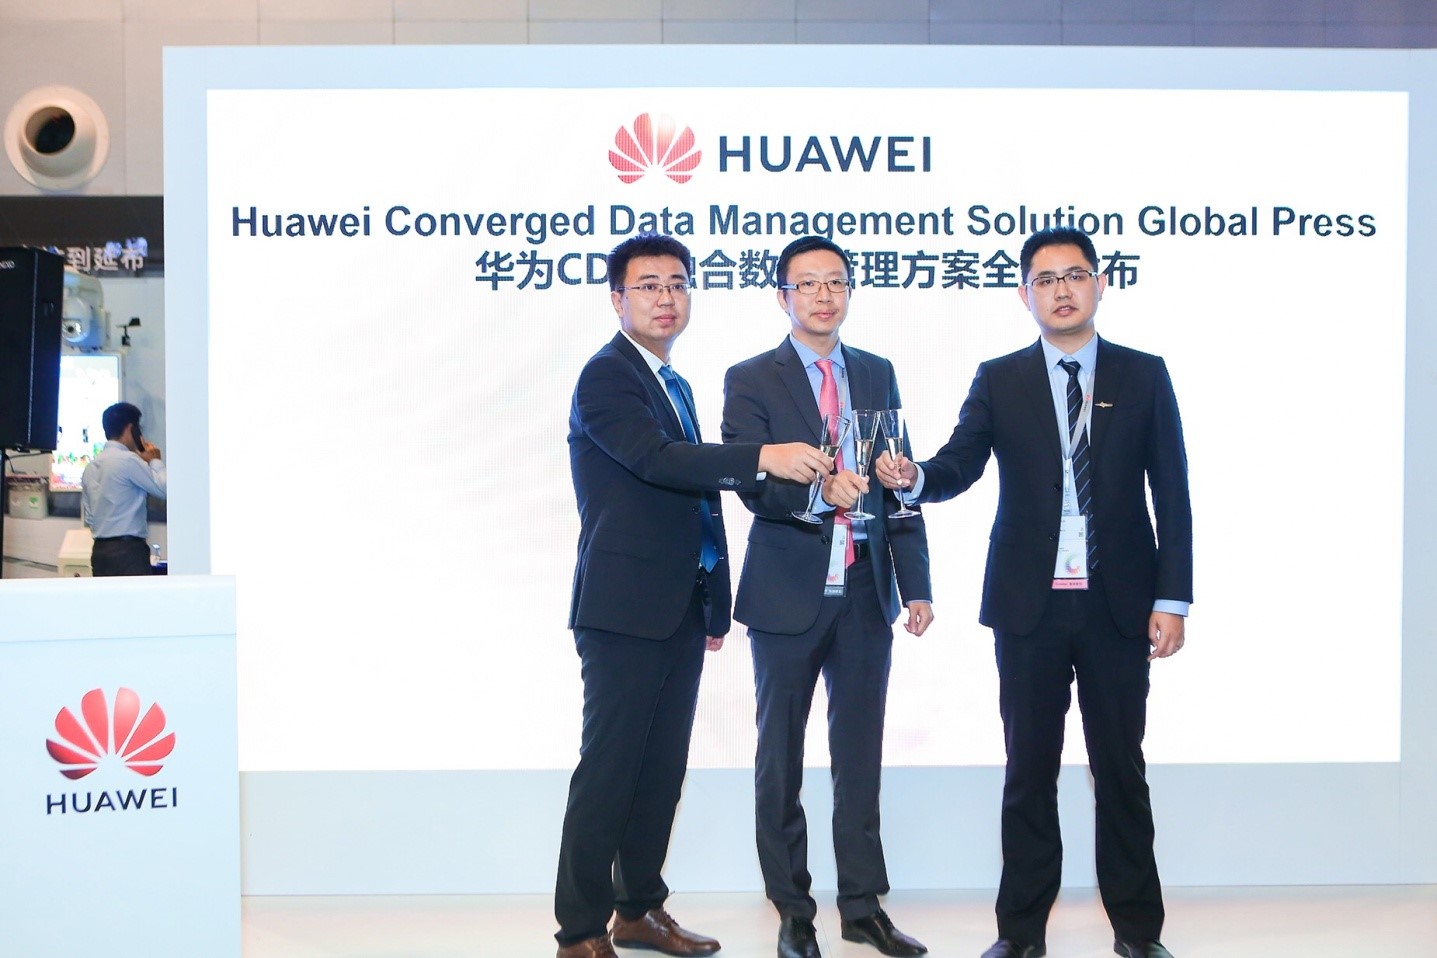 Three Huawei executives hold Champagne flutes, toasting the launch of the Converged Data Management (CDM) Solution